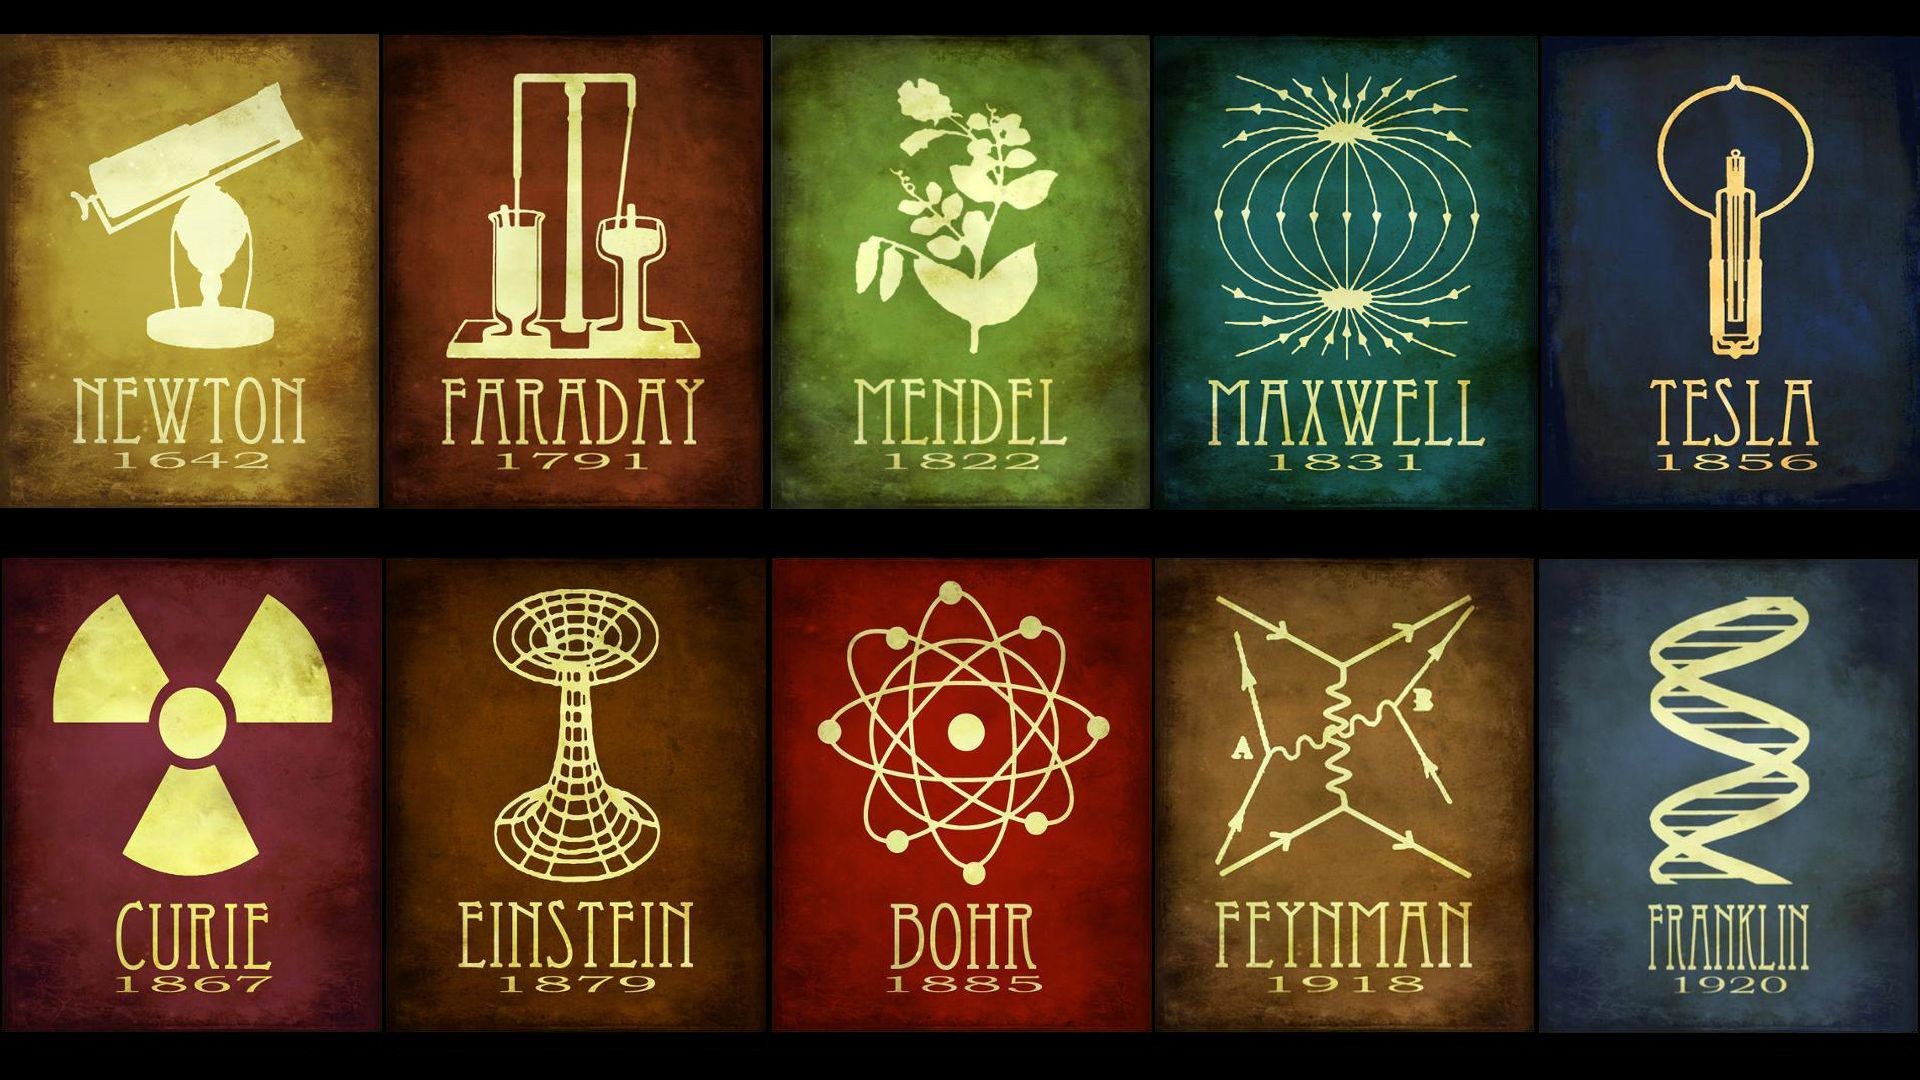 A poster of the logos of ten famous scientists - Chemistry